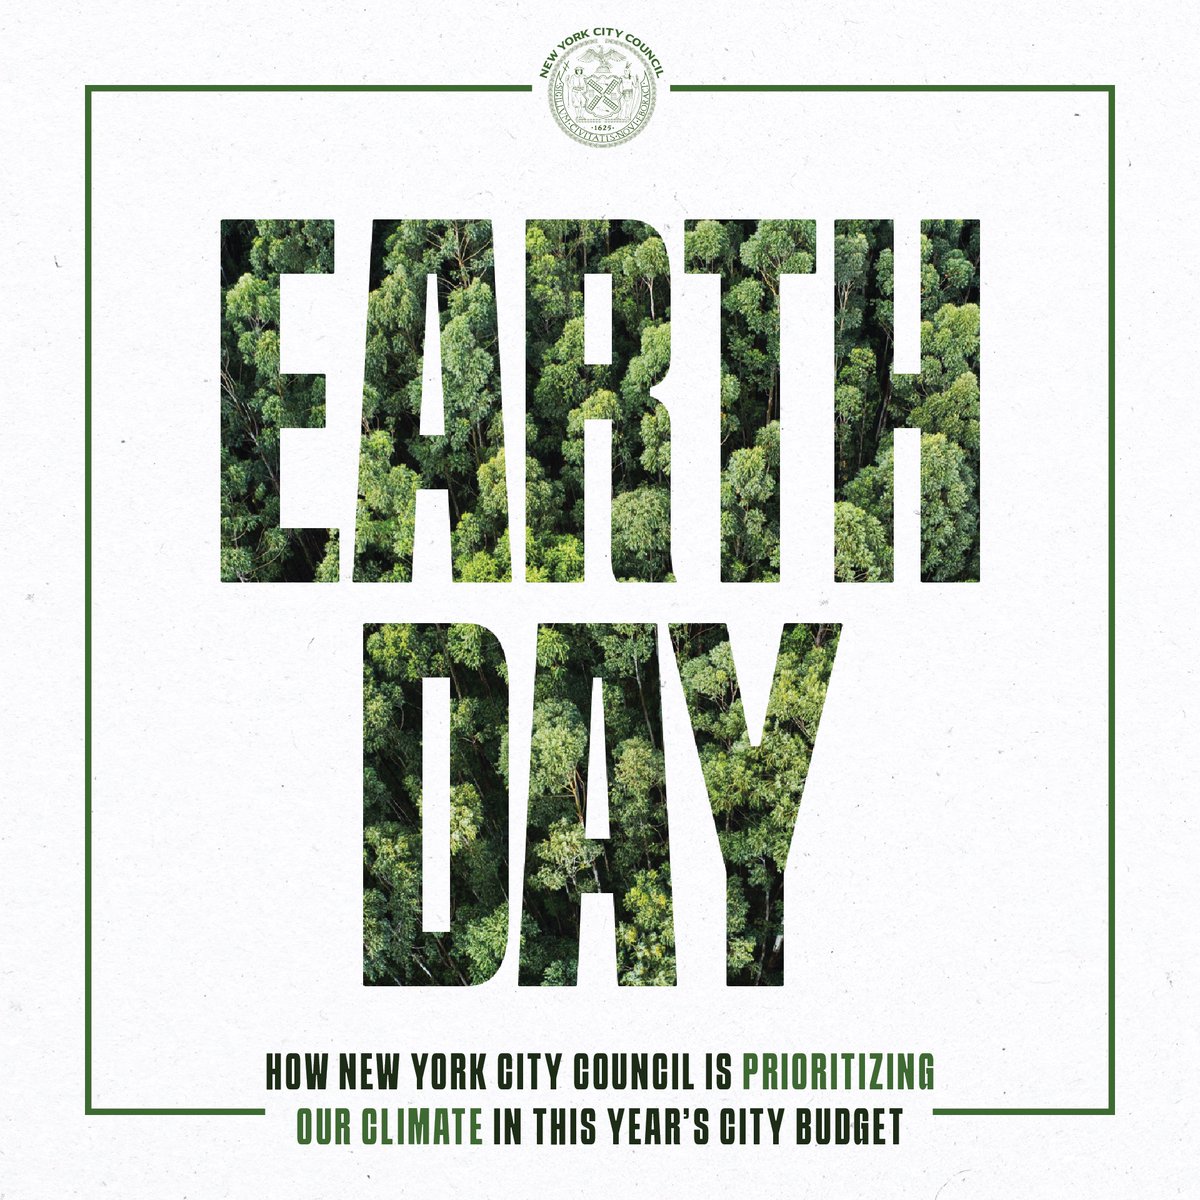 Happy #EarthDay, NYC! As the deadline for passing this year’s city budget approaches, the Council remains committed to funding key climate-focused priorities to advance a healthy, safe, and green city for all New Yorkers. 🧵